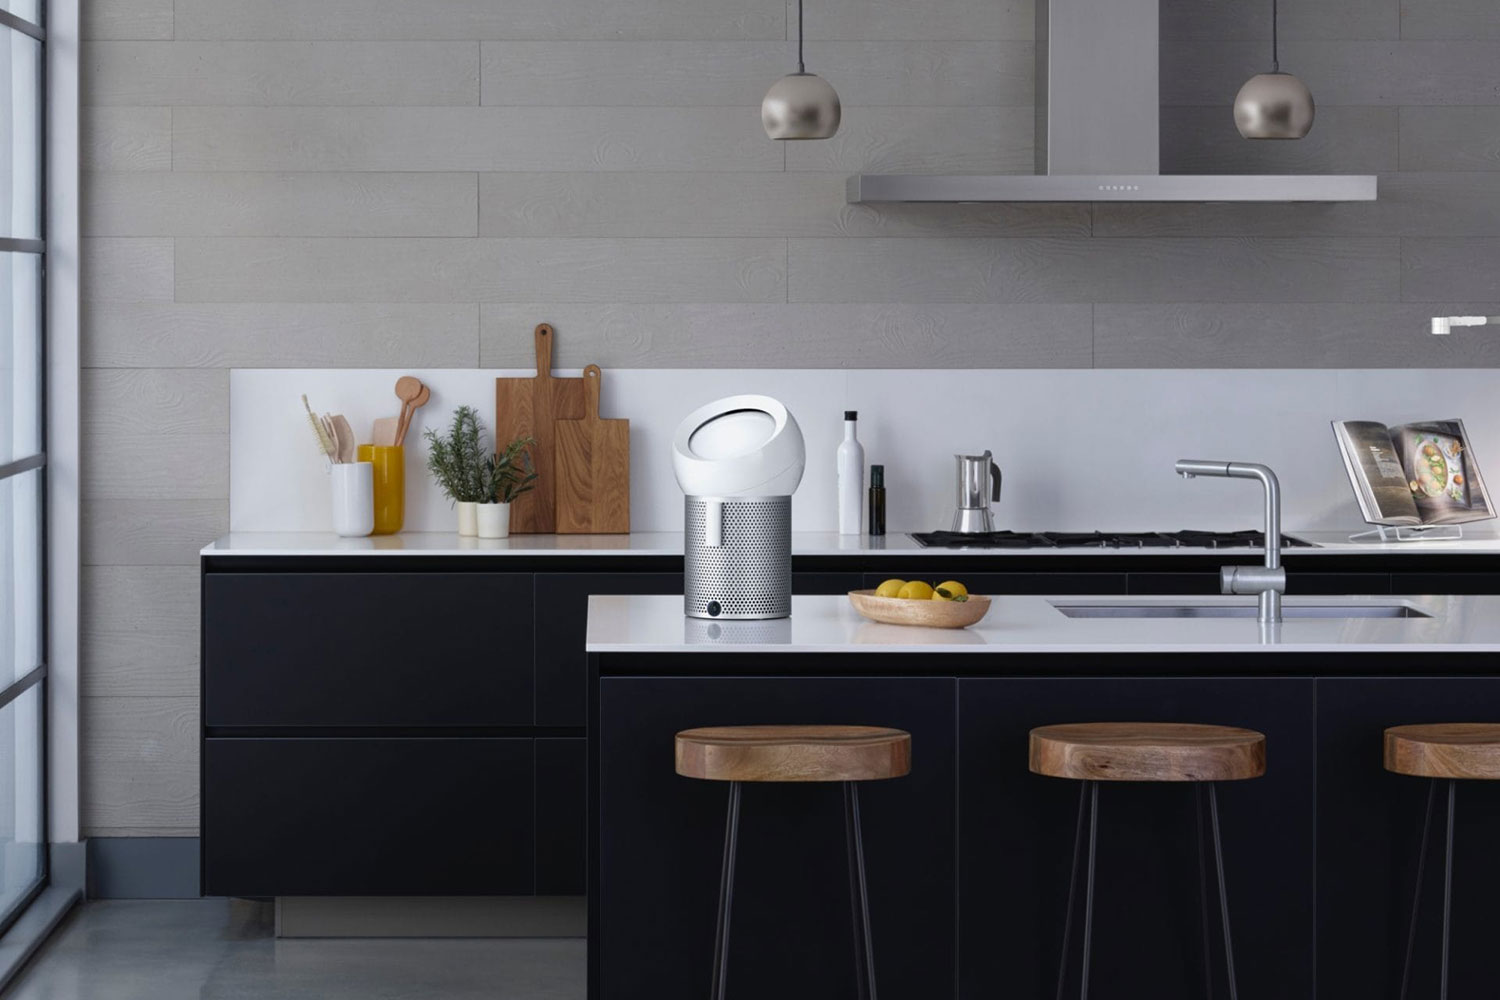 Dyson’s Pure Cool Me is the Coolest New Filter Around